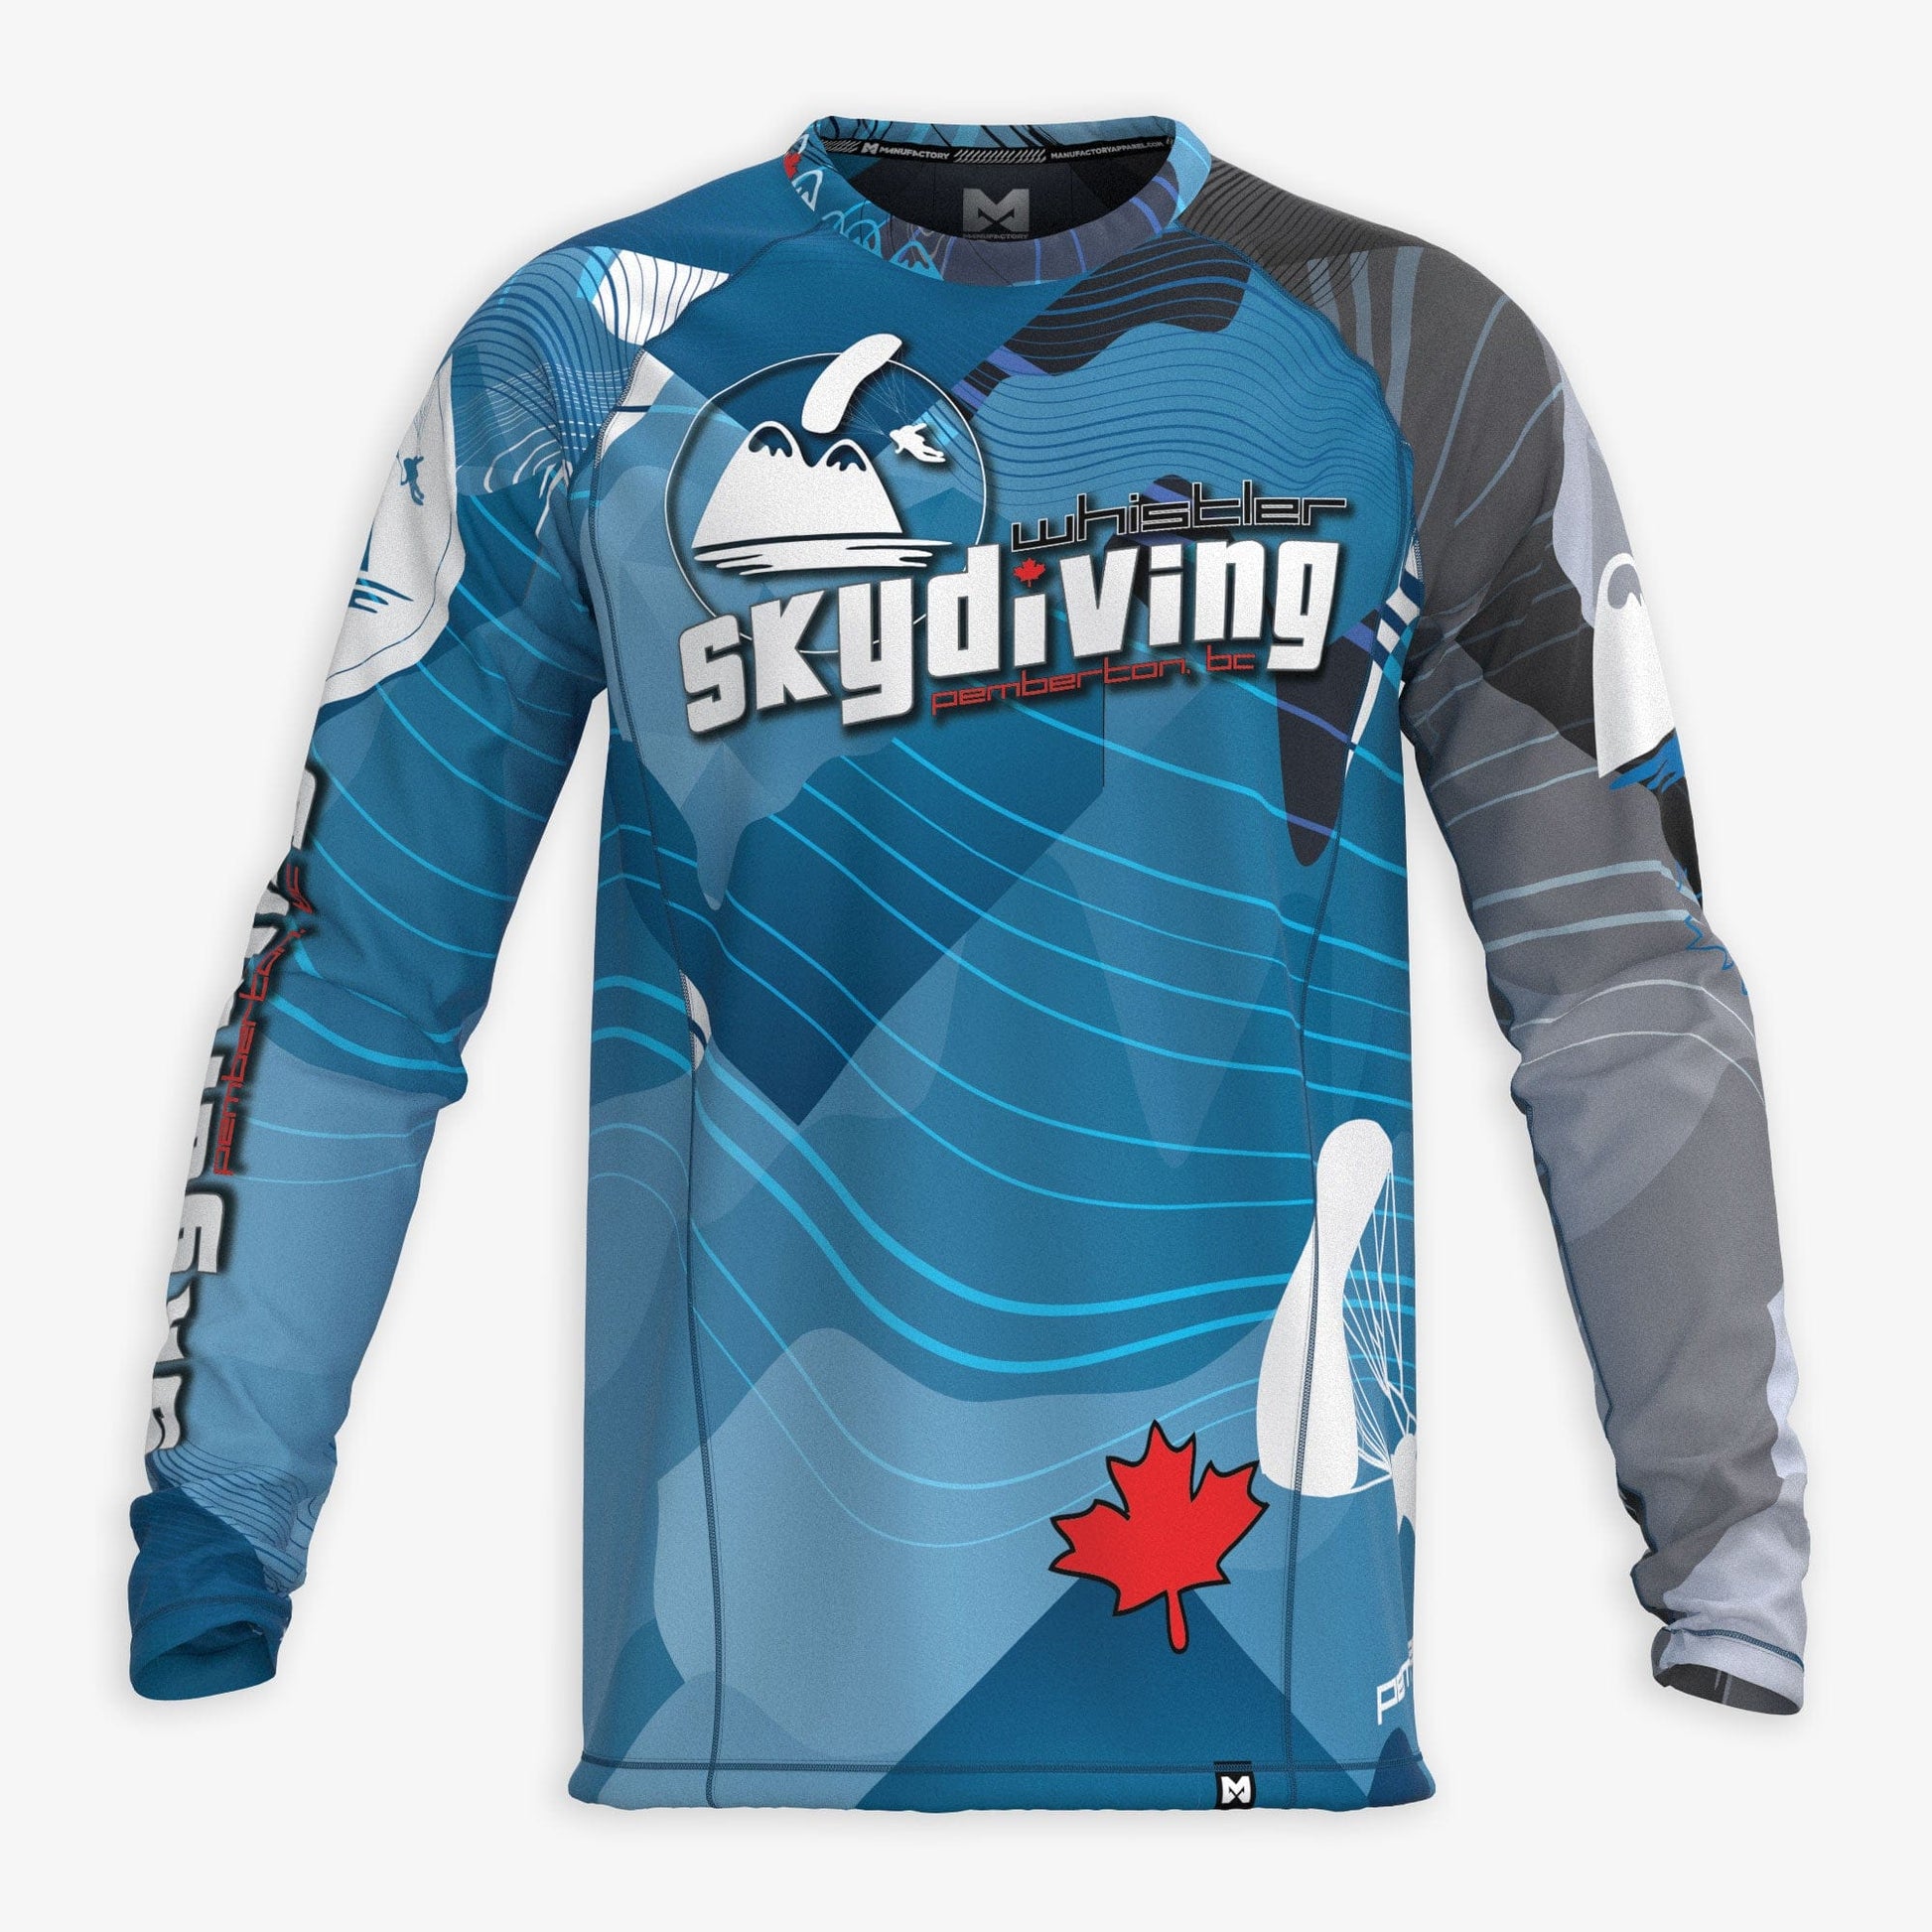 WS | Whistler Skydiving | Jersey - Manufactory Apparel - Whistler Skydiving